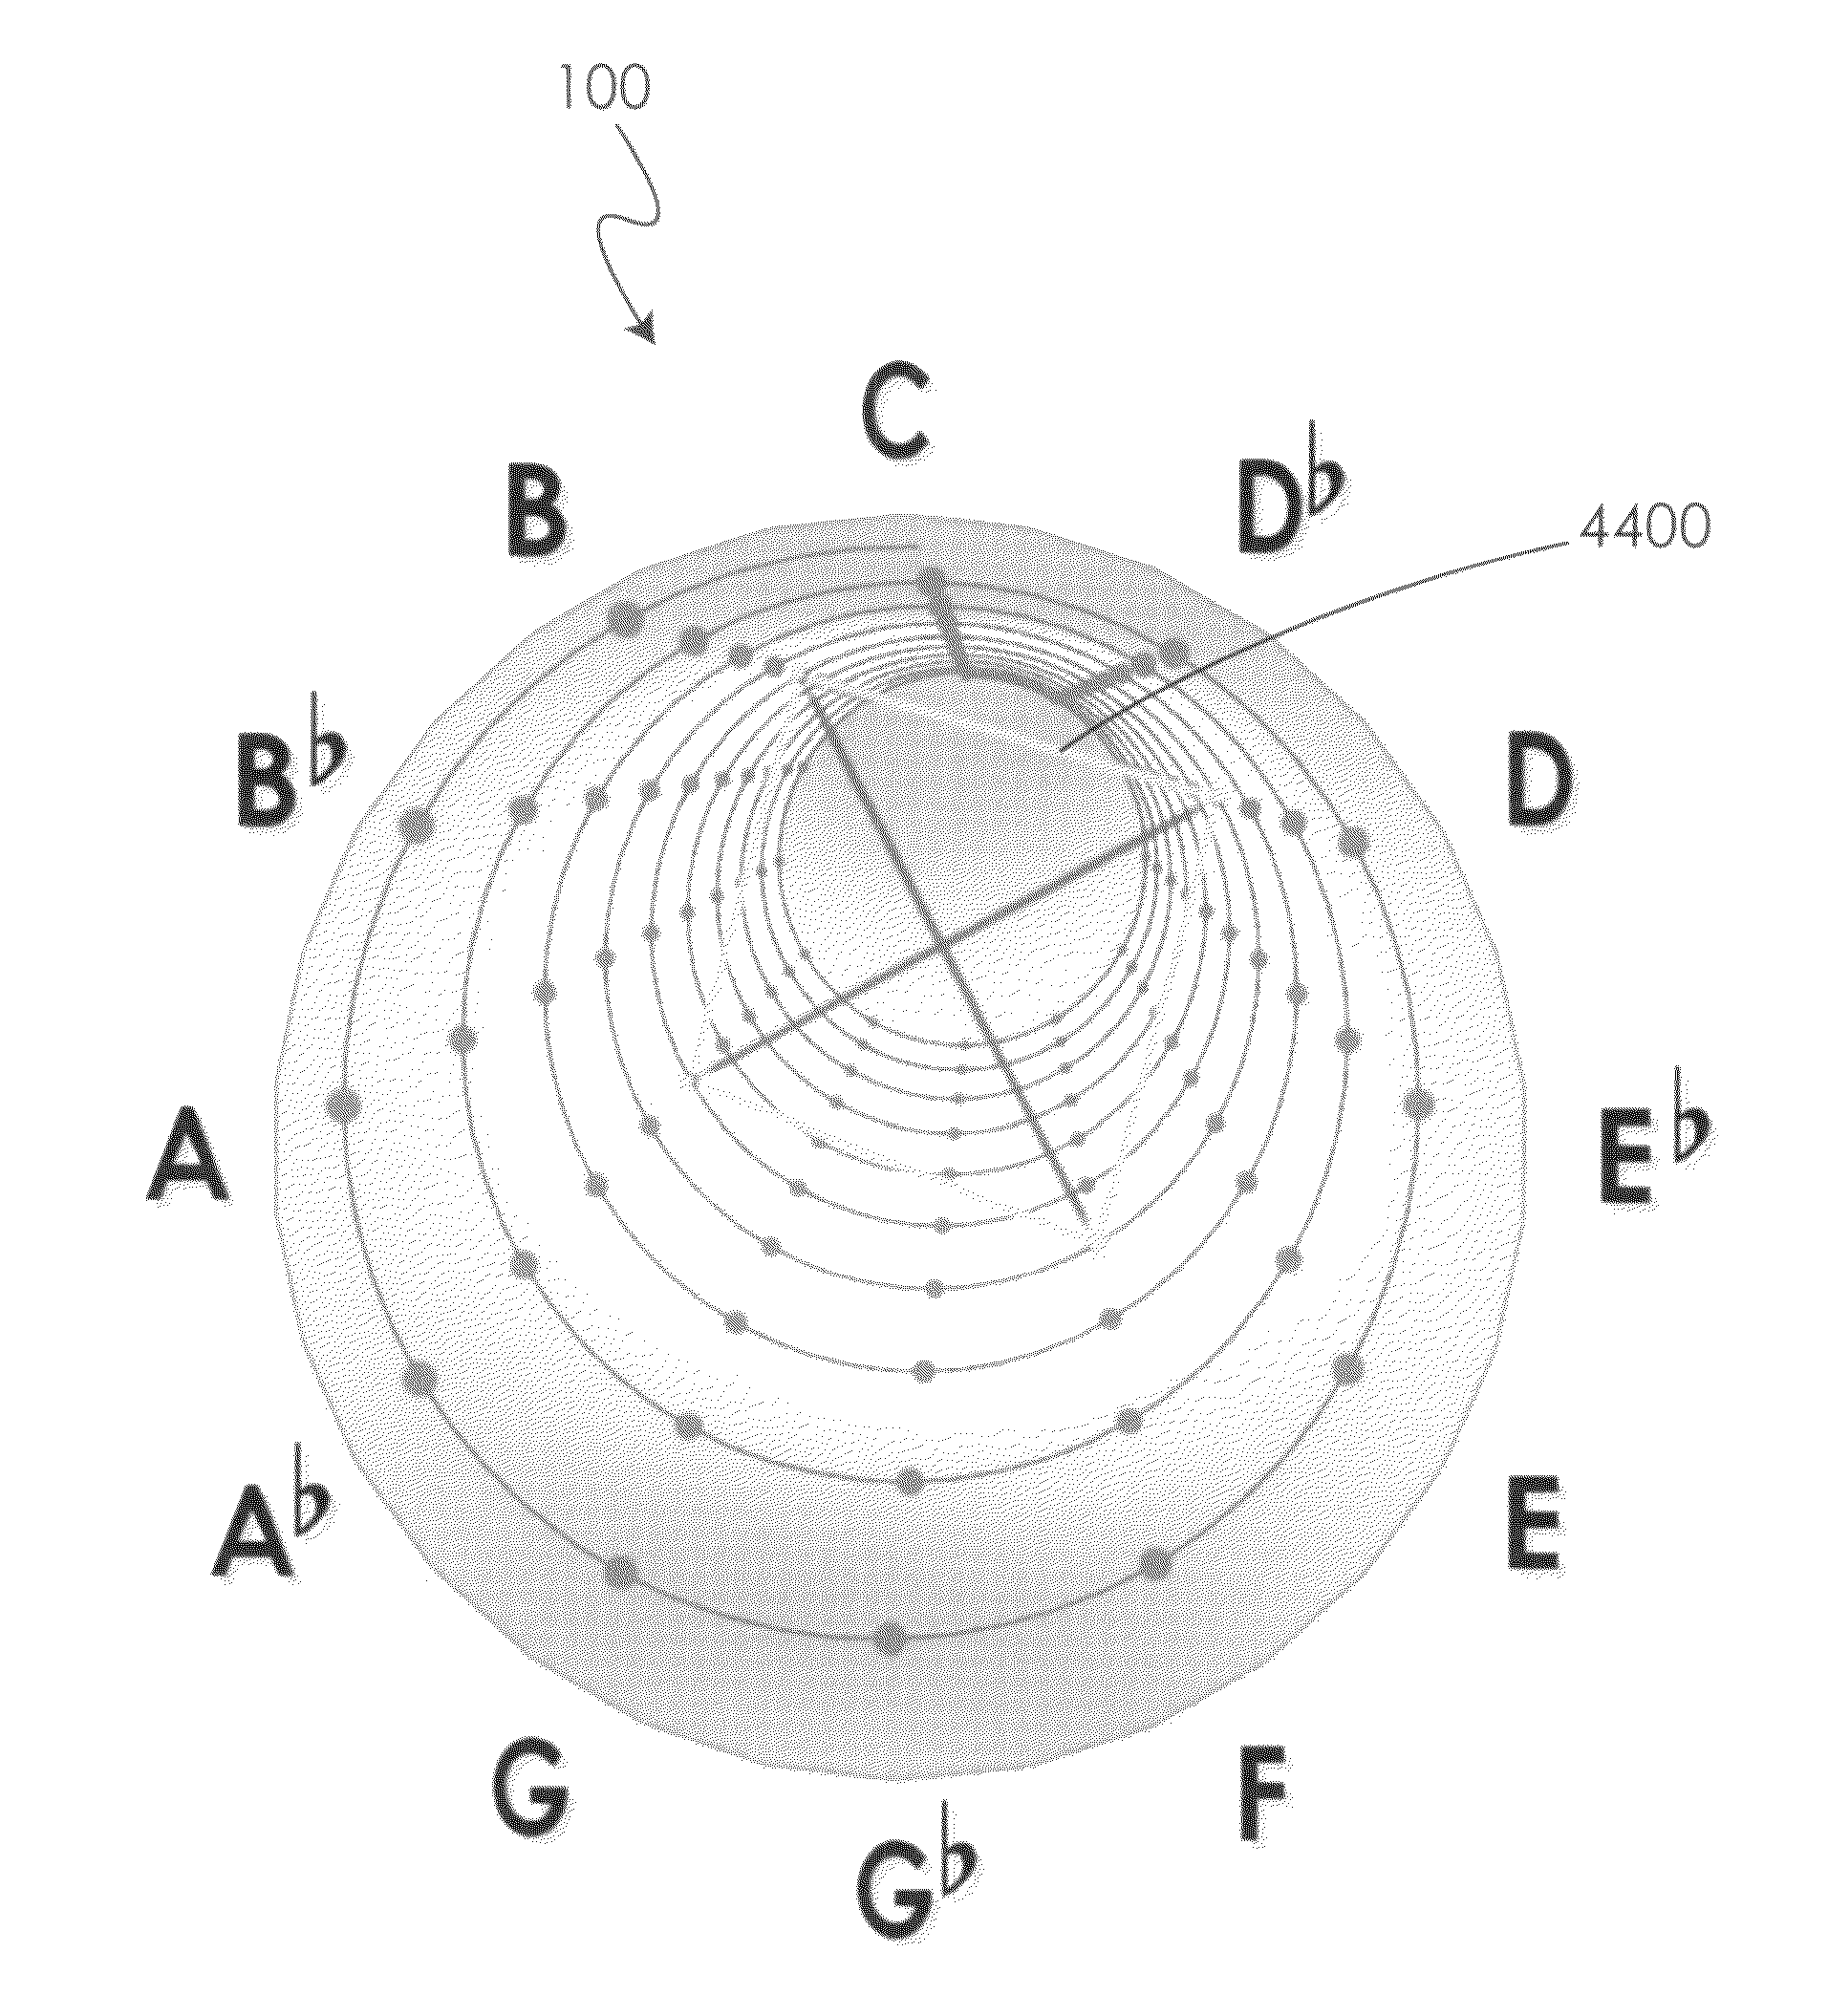 Apparatus and method for visualizing music and other sounds